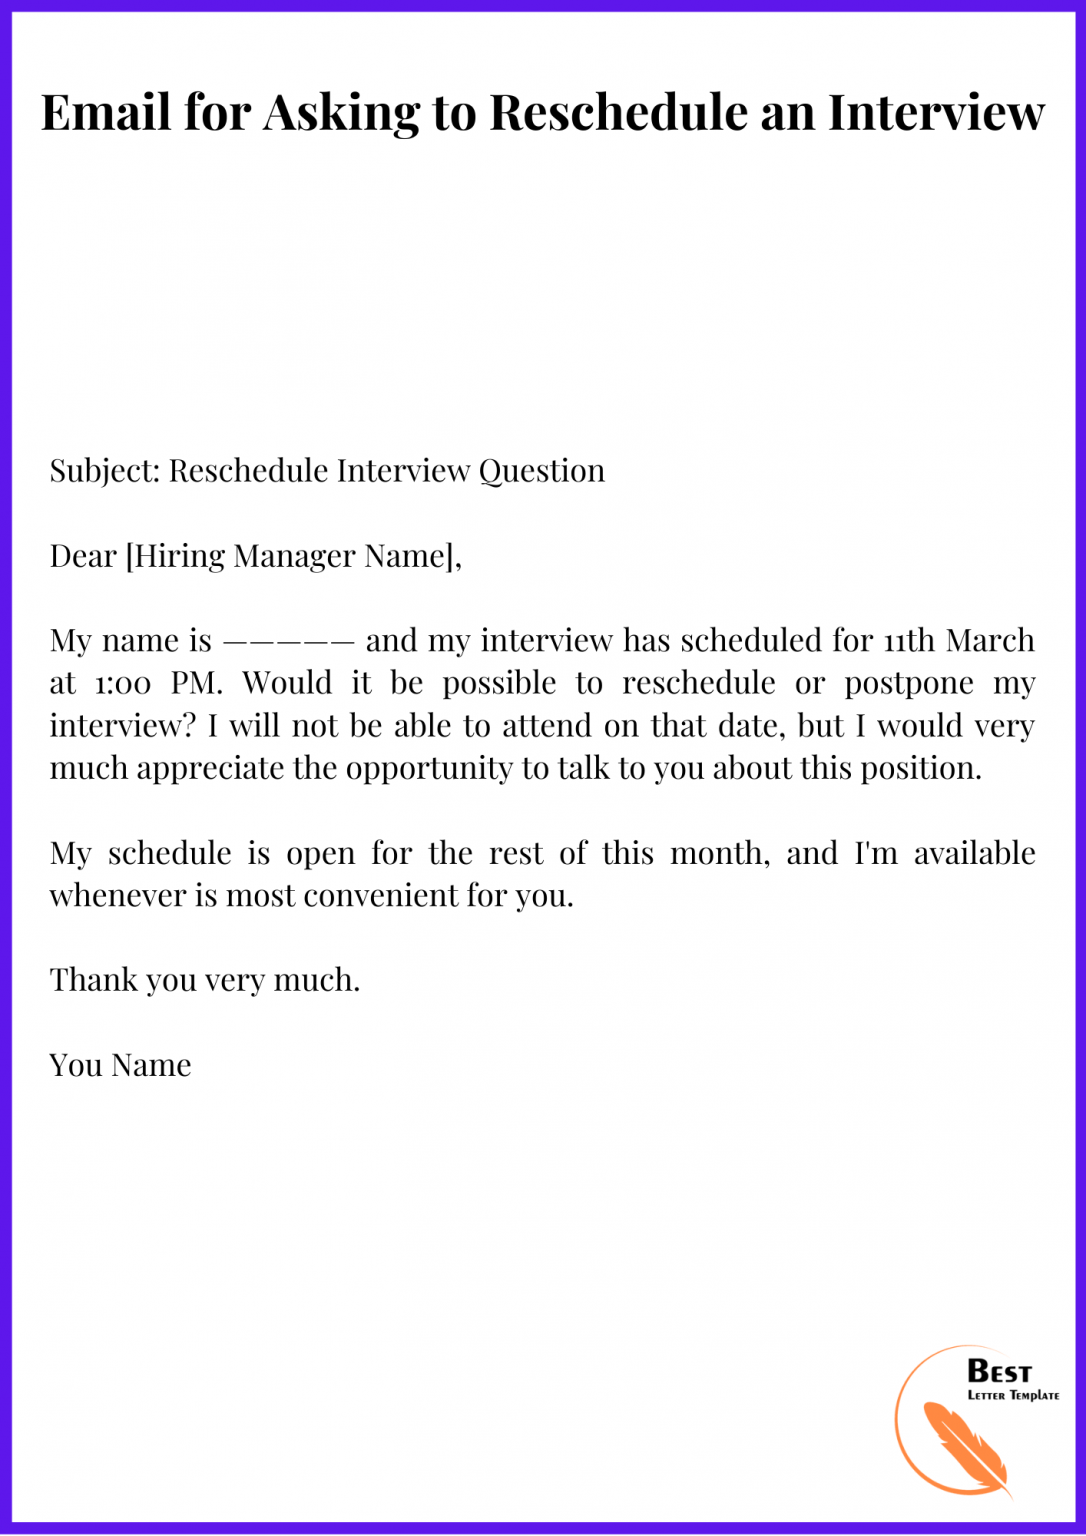 Email for Asking to Reschedule an Interview Best Letter Template